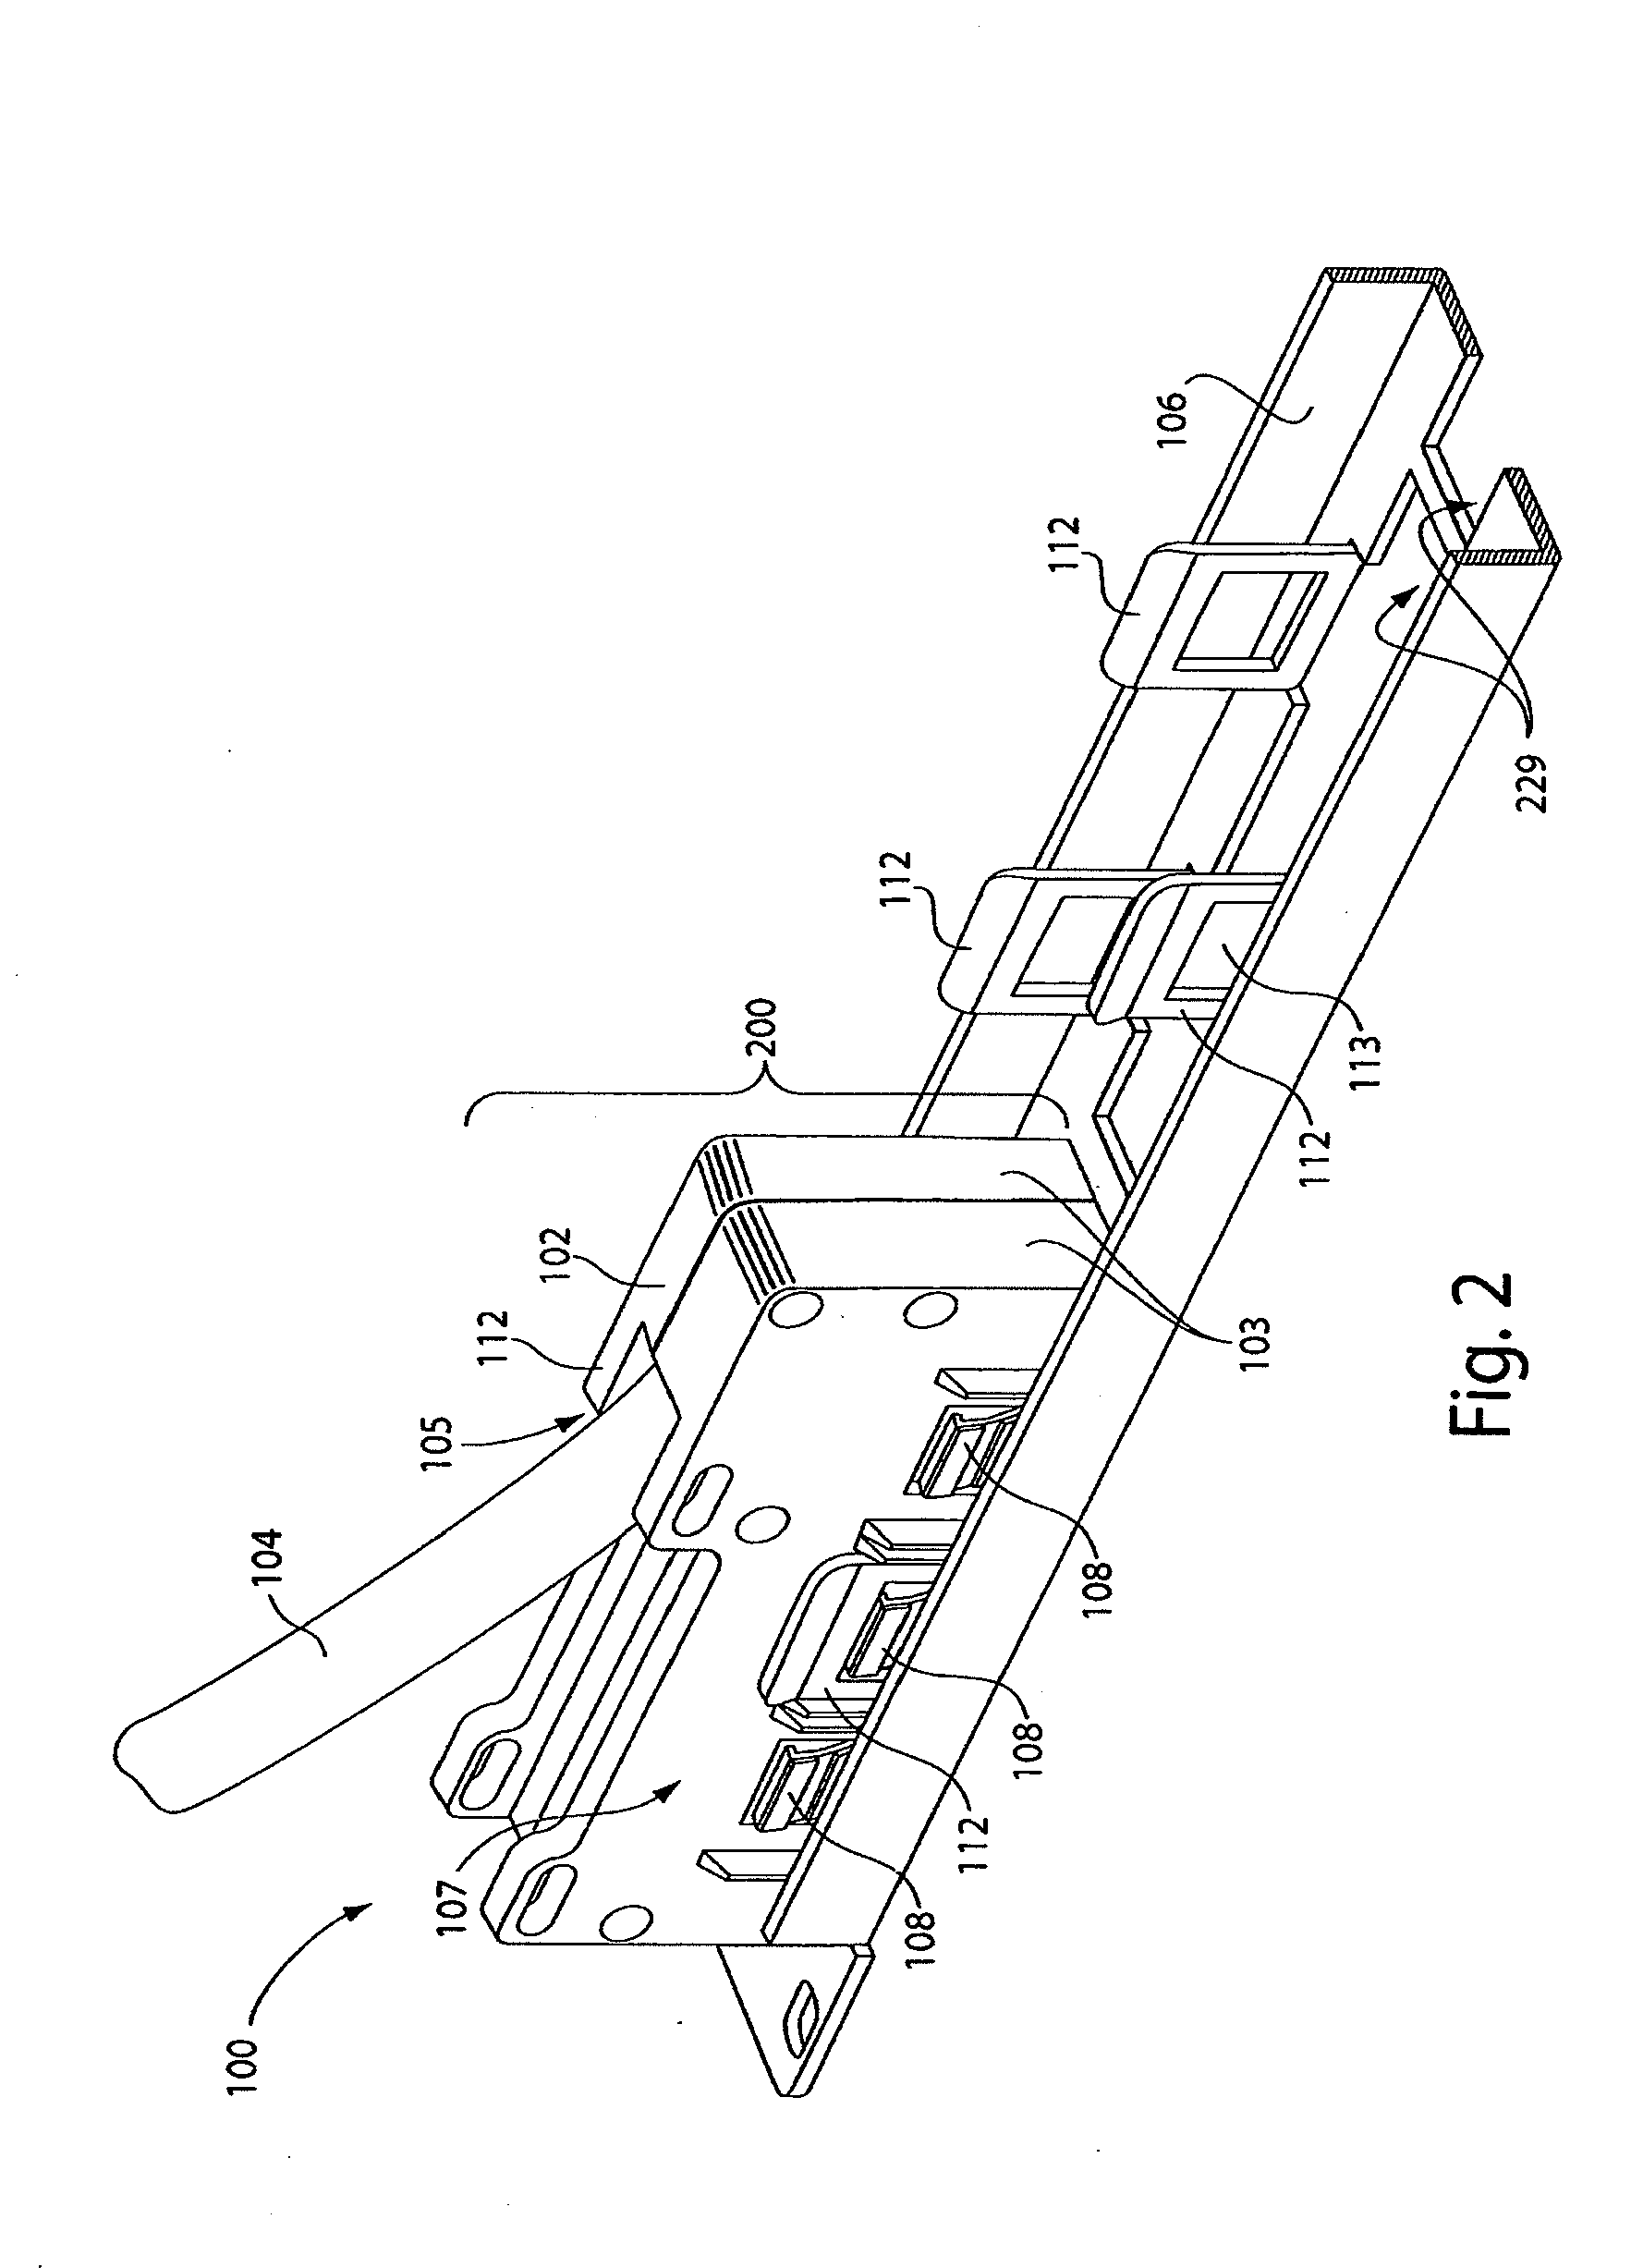 Multi-port cabling system and method